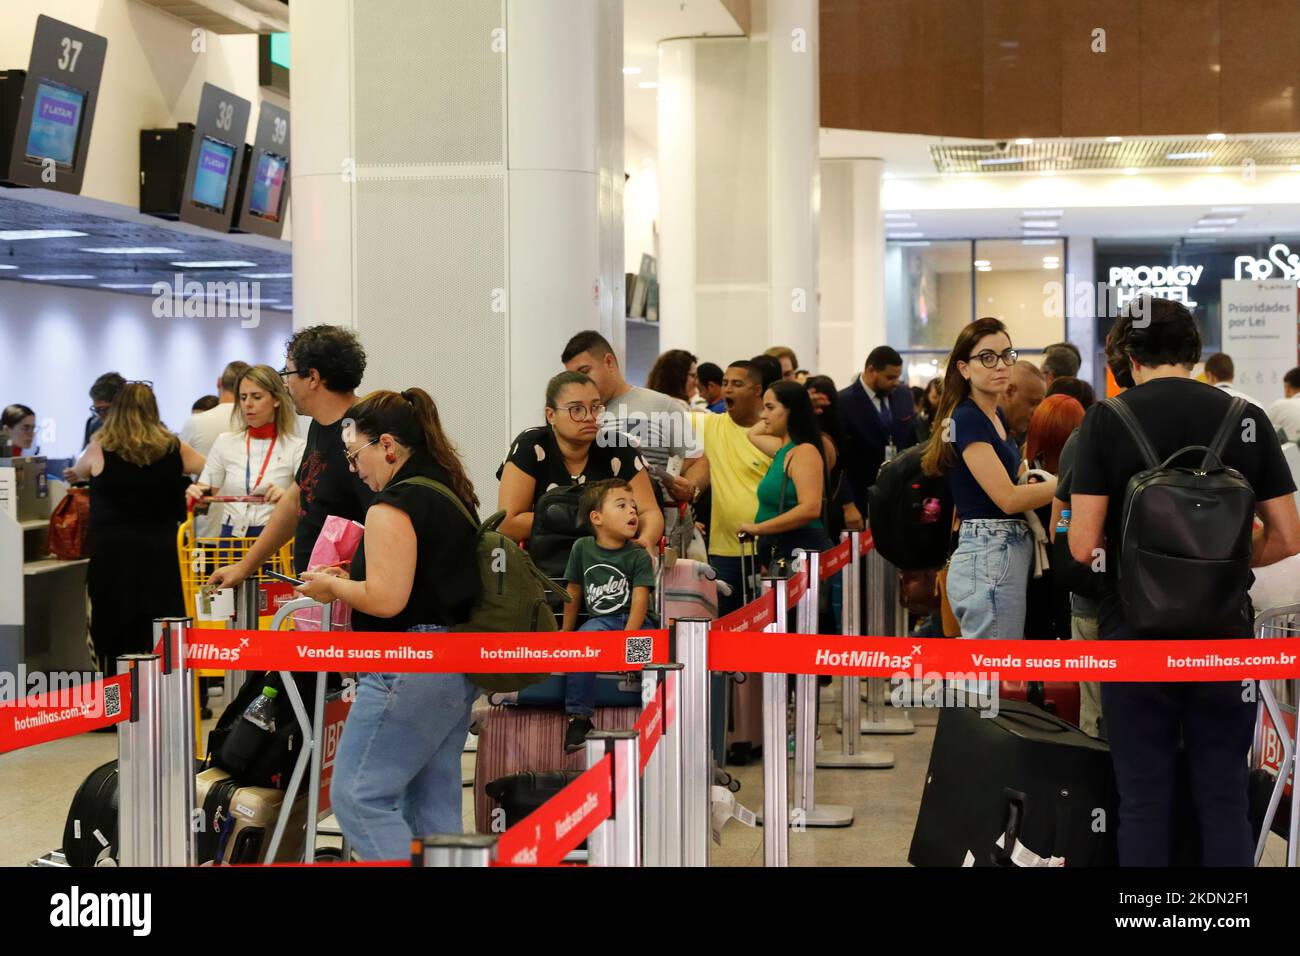 Santos Dumont Airport passengers in line at the boarding counters. Travellers at airport lobby, baggage drop area Stock Photo